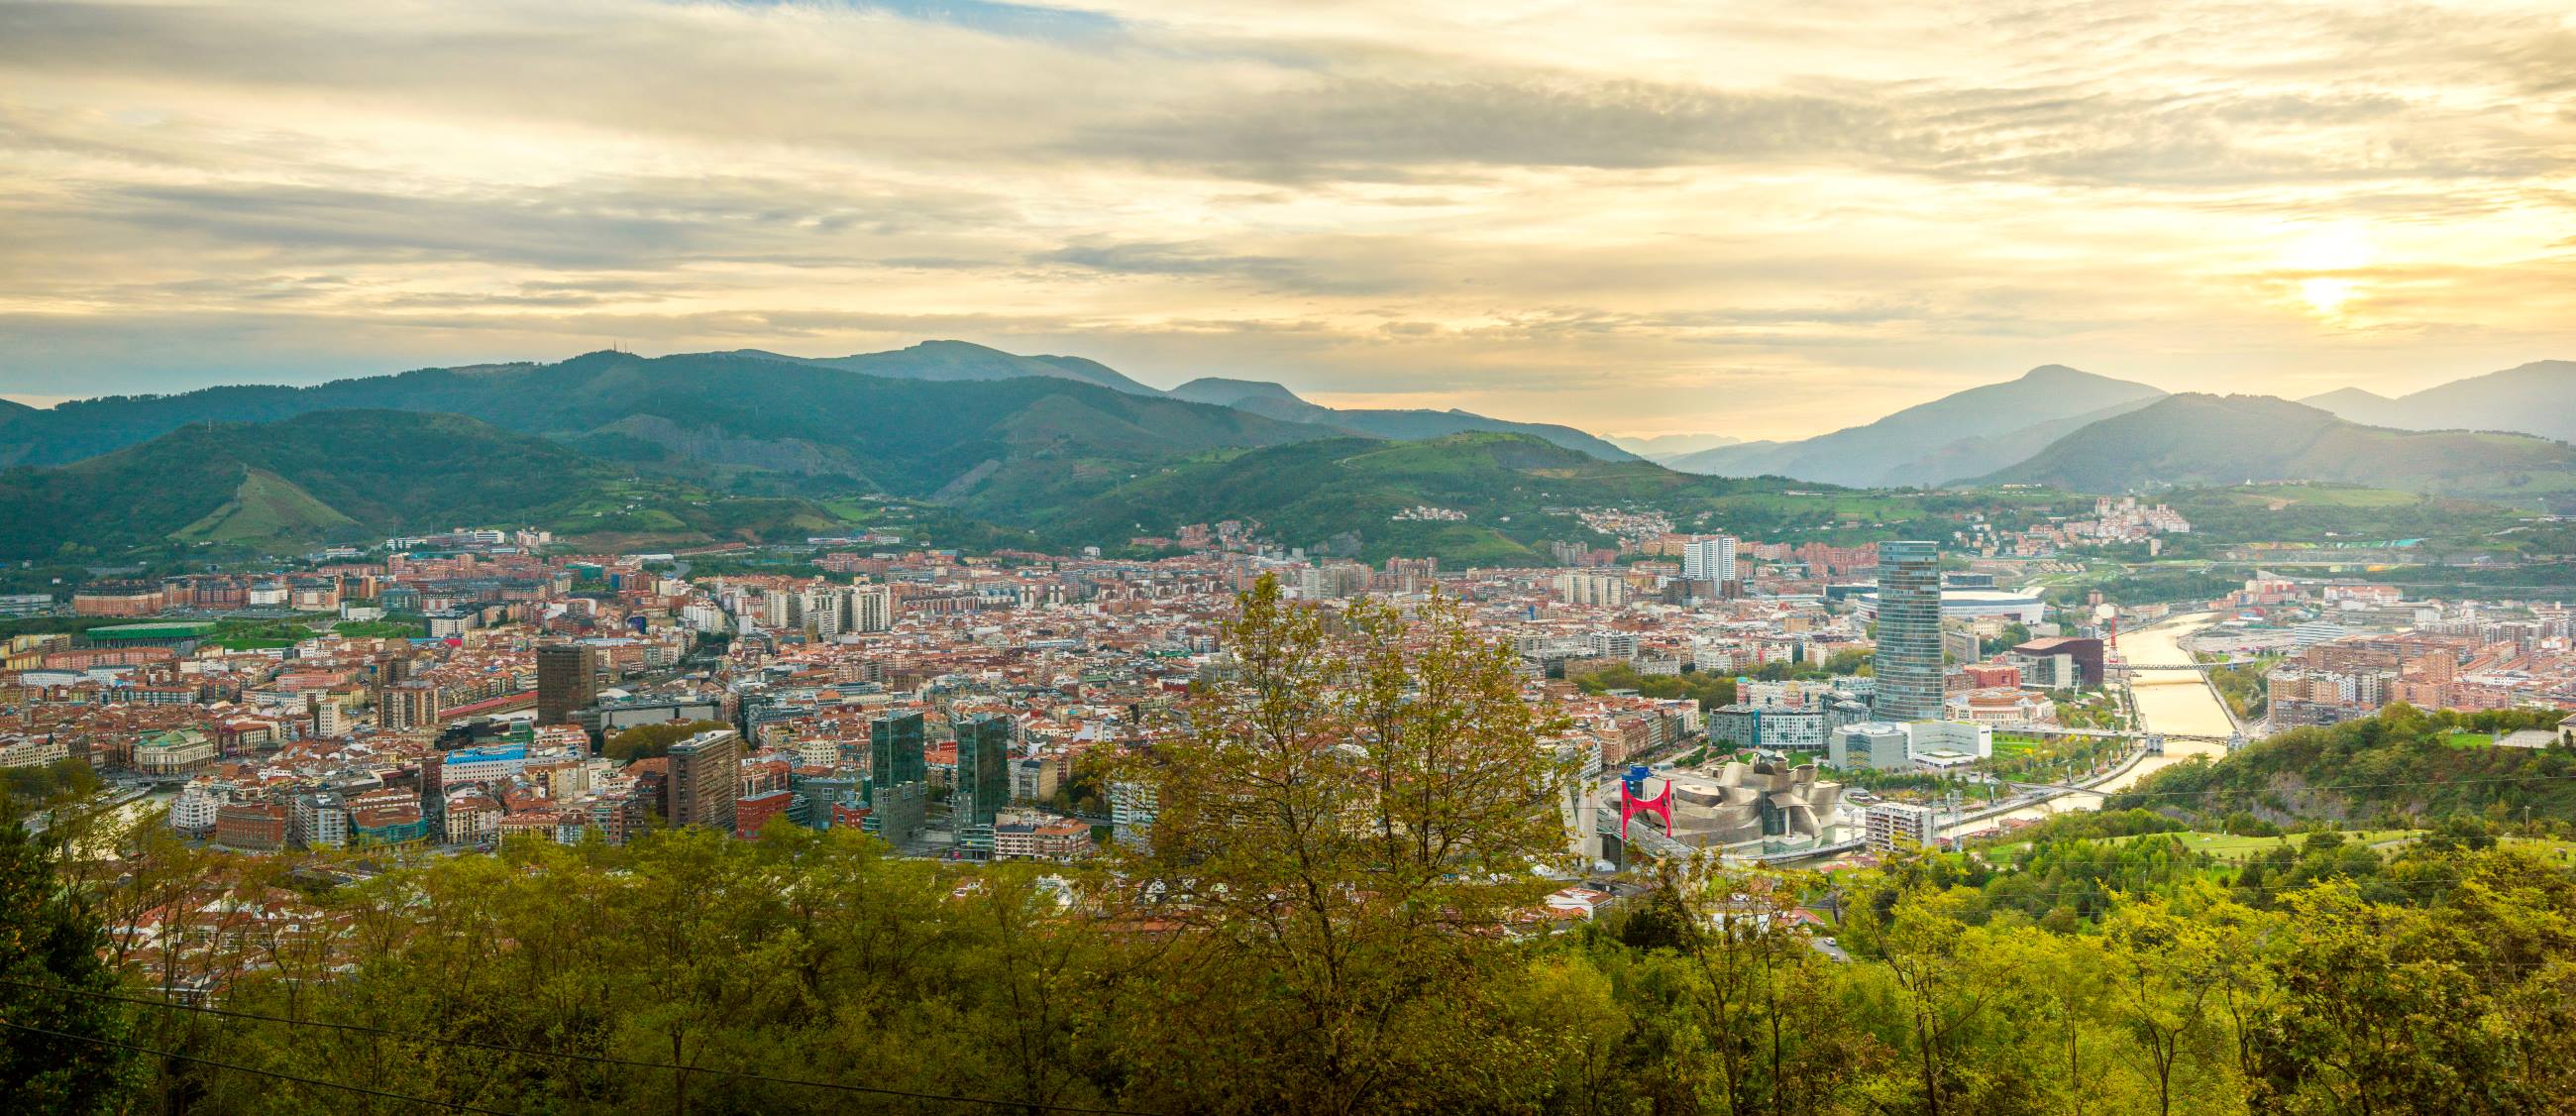 Bilbao-to-Barcelona-One-Short-Trip-With-Two-Great-Destinations